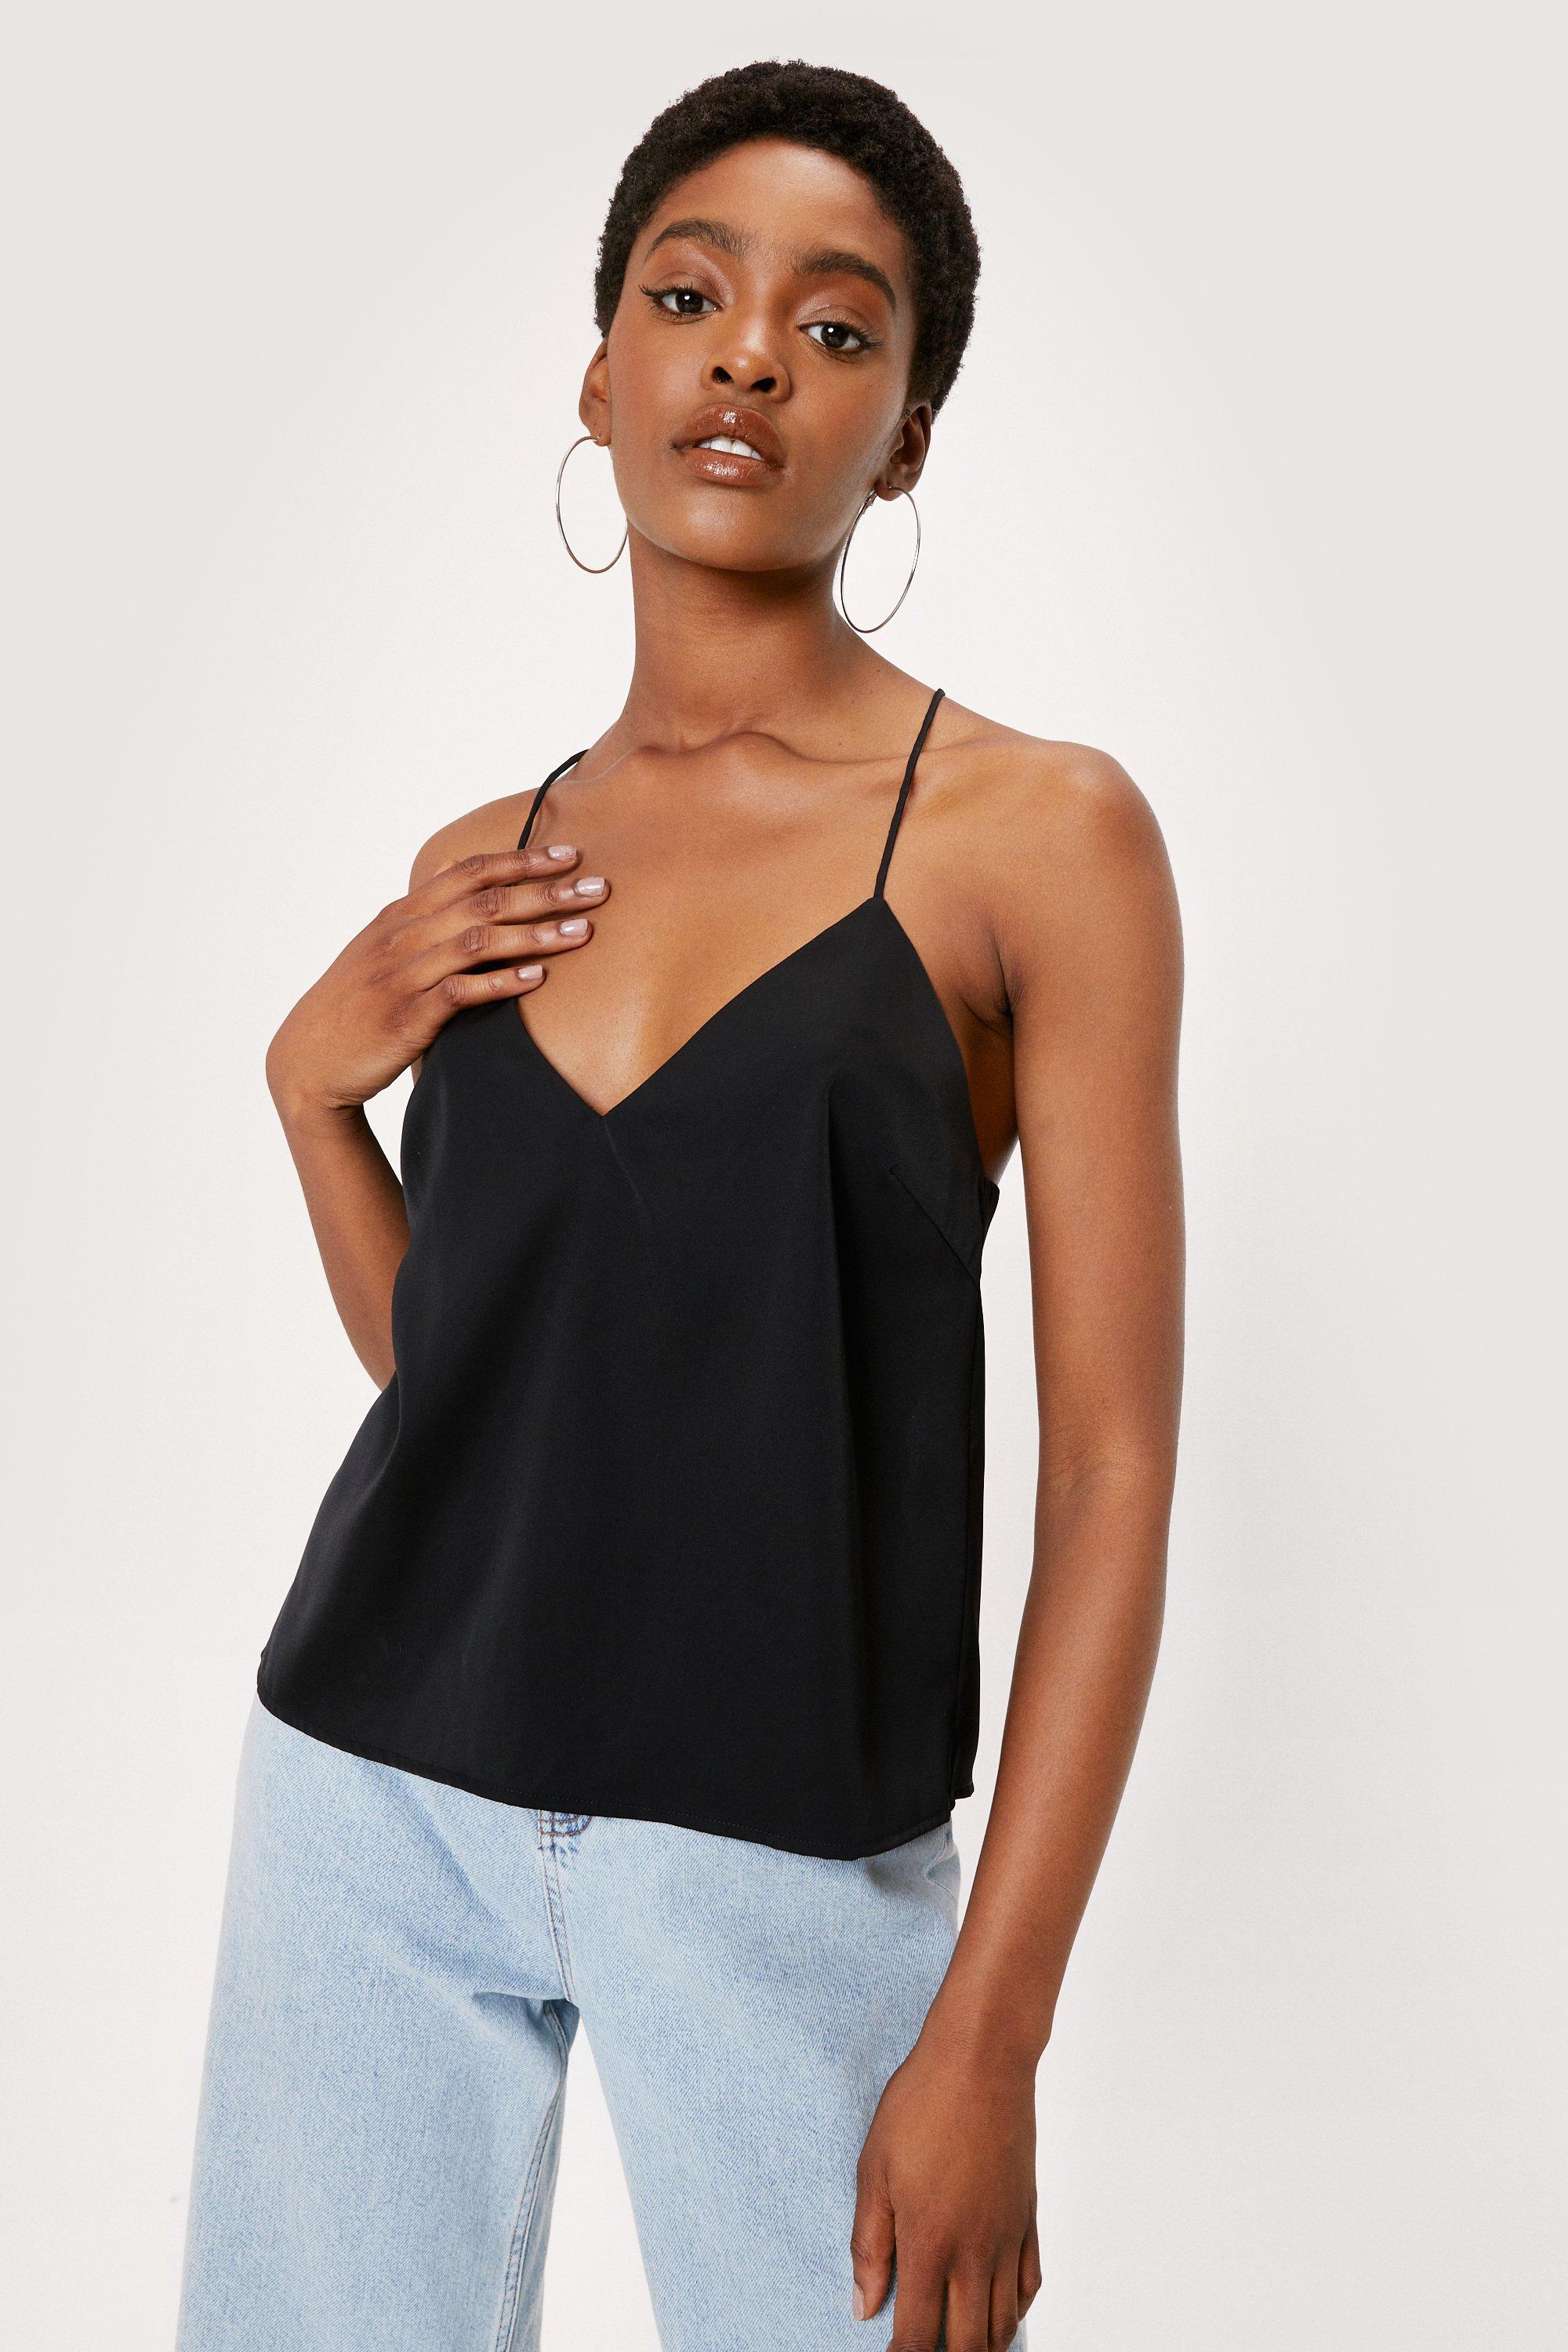 TALA Skinluxe Strappy Back Cami Top